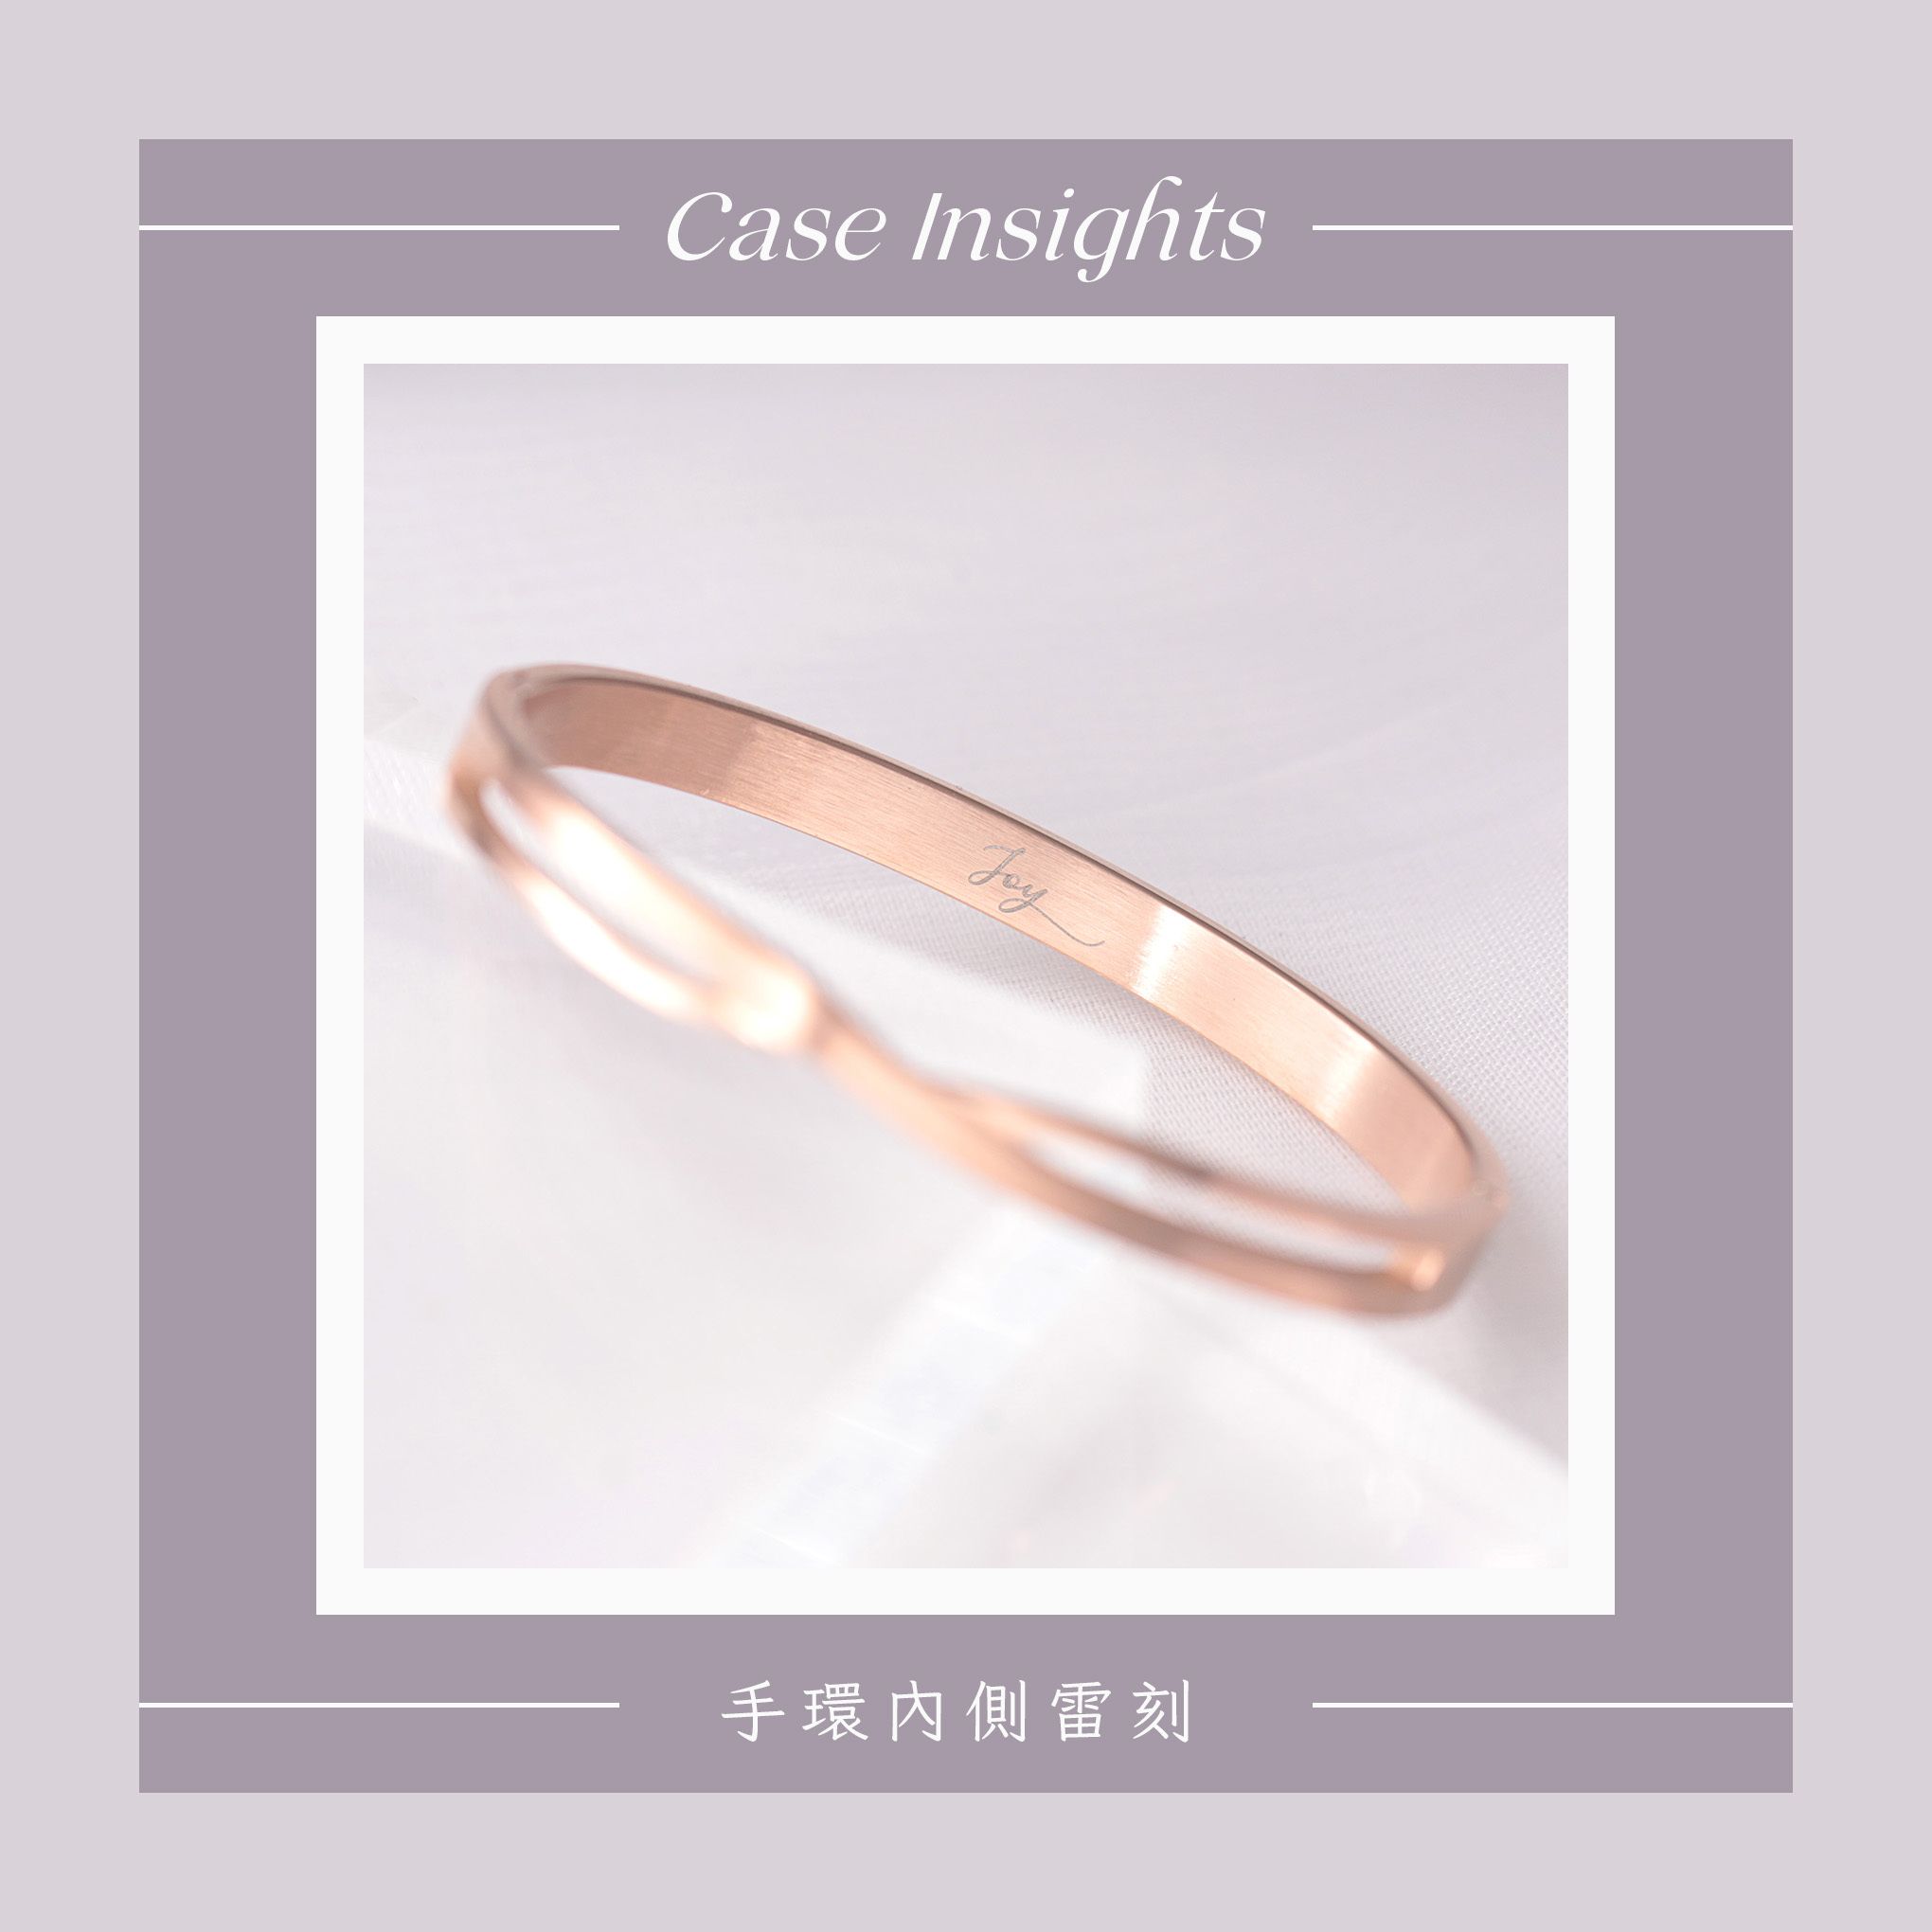 Case insights 06